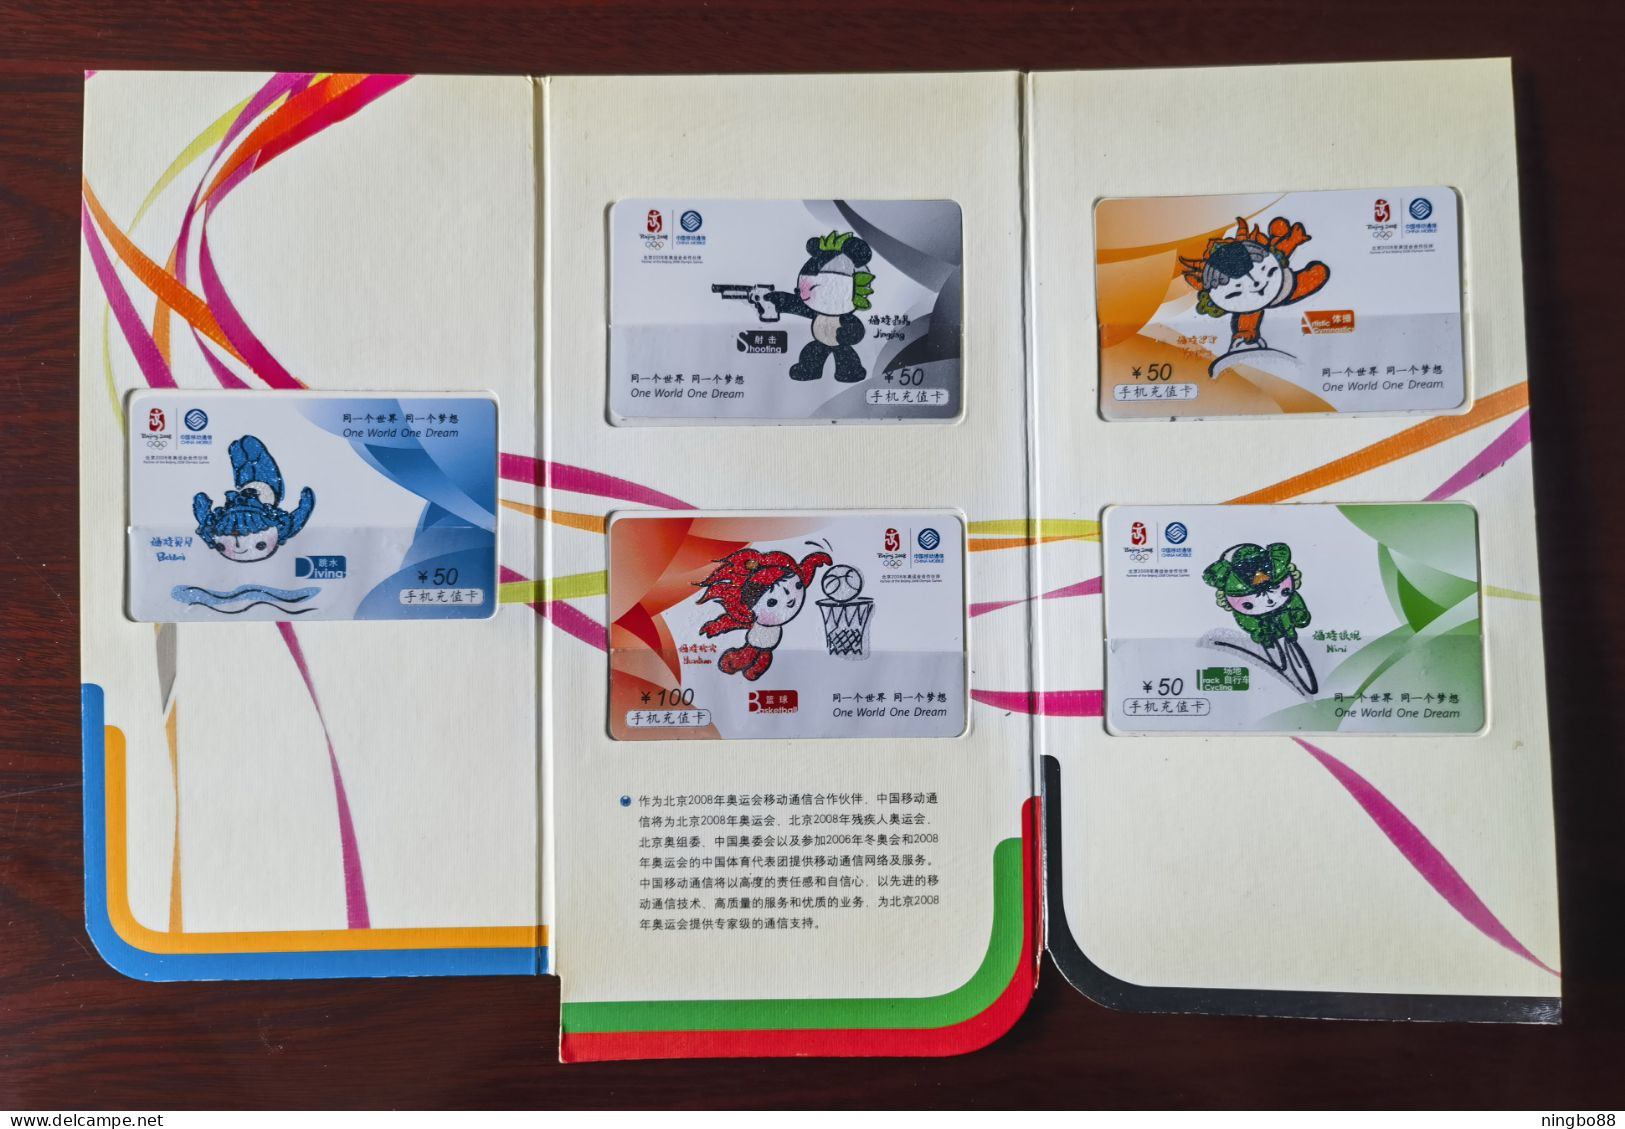 China 2008 Set Of 5 Beijing 2008 Olympic Games Mascot Fuwa Top-up Cards In Fold,used - Olympic Games